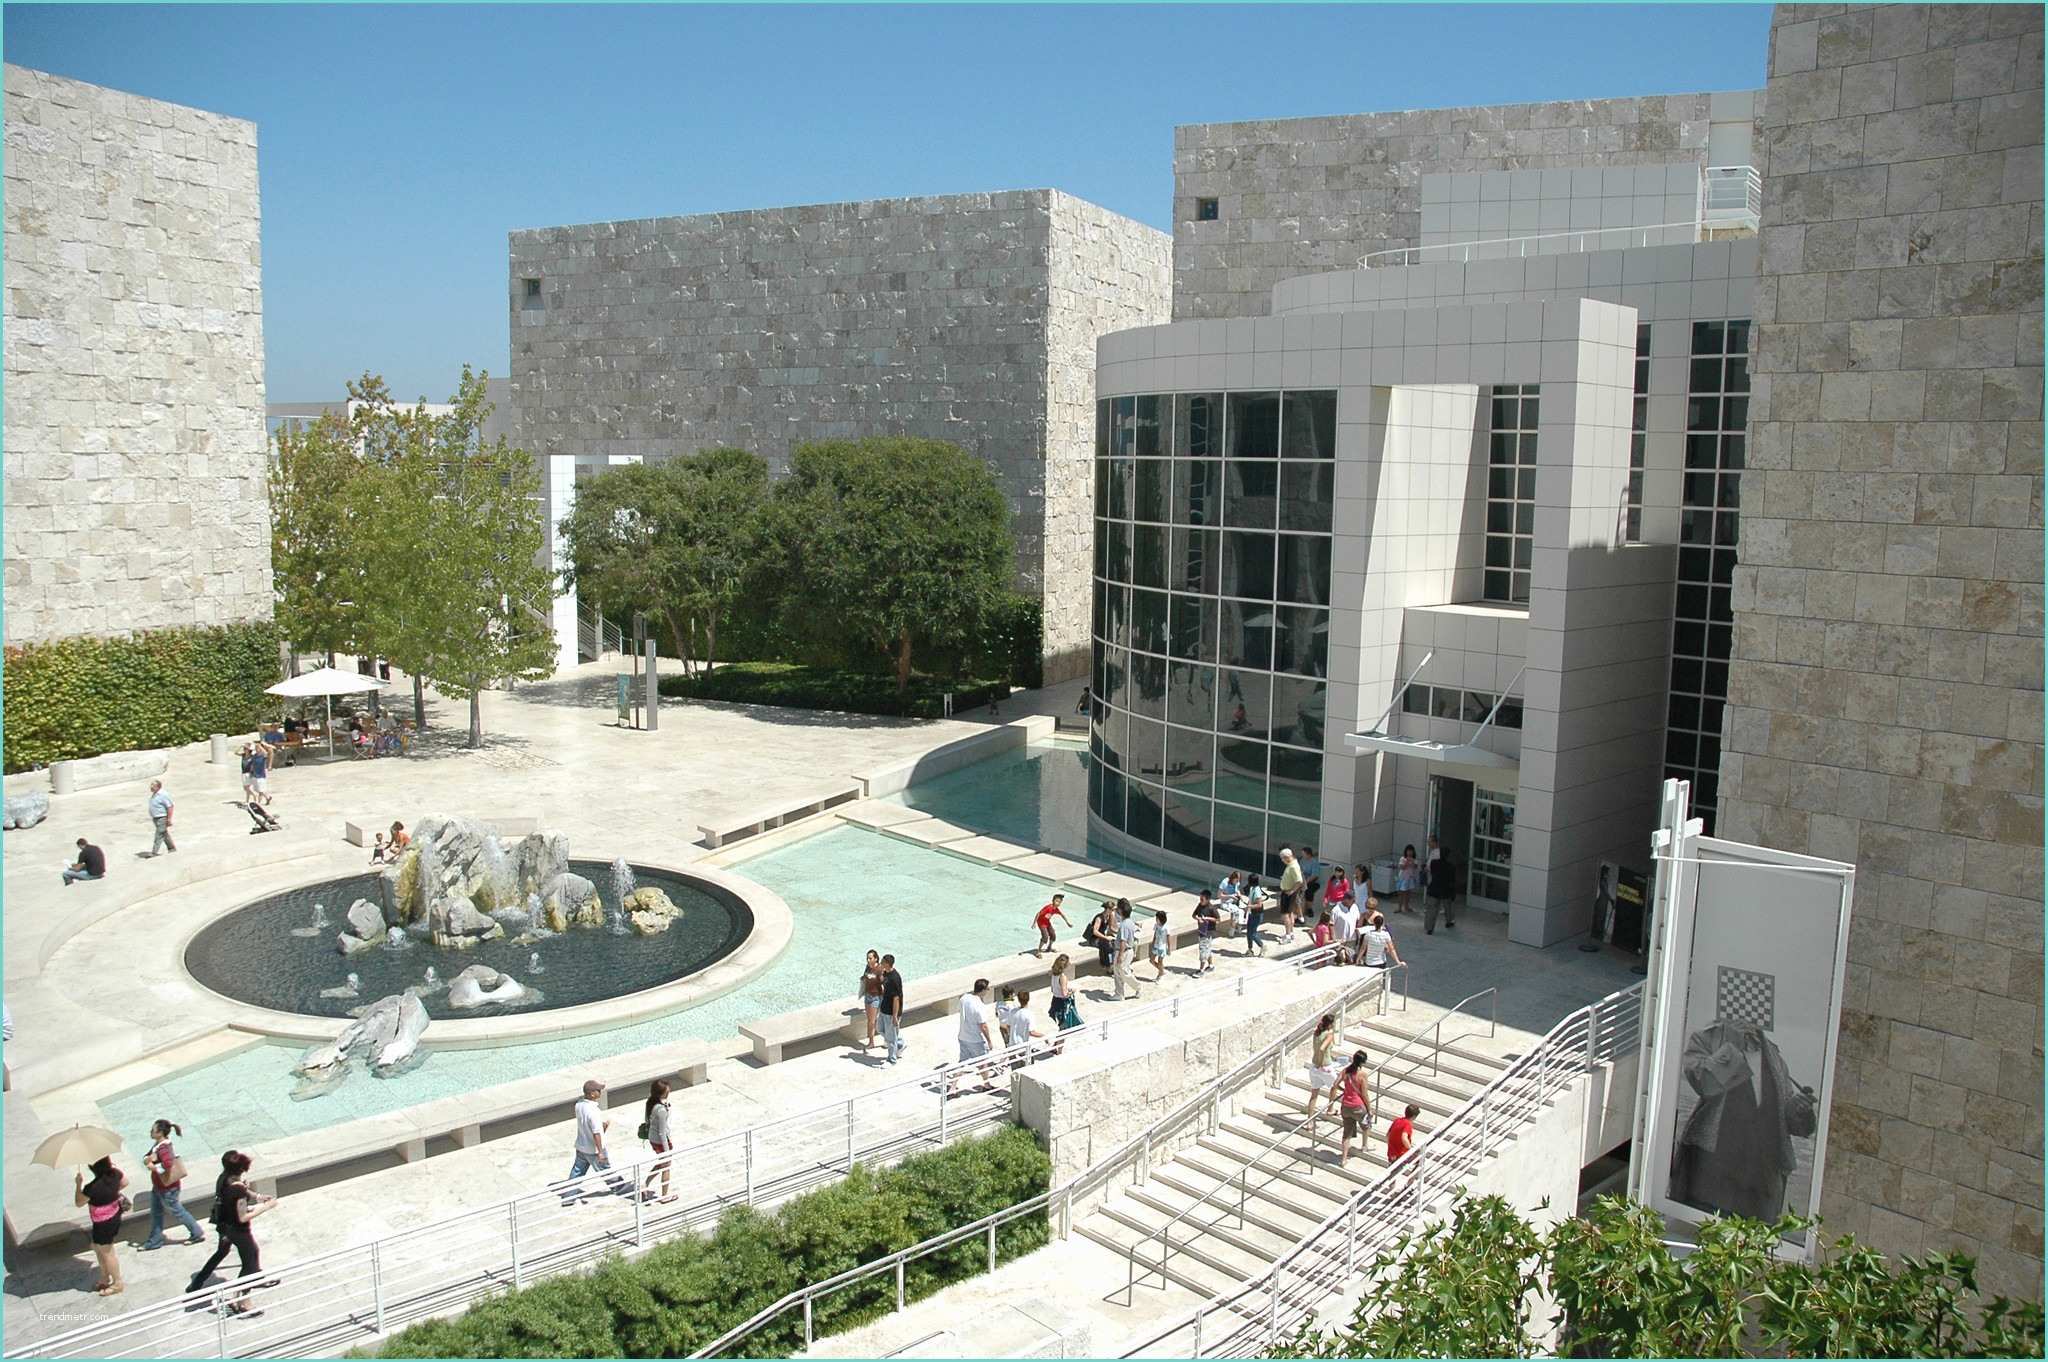 And Pictures Getty Getty Museum Hires Jeffrey Spier Davide Gasparotto as